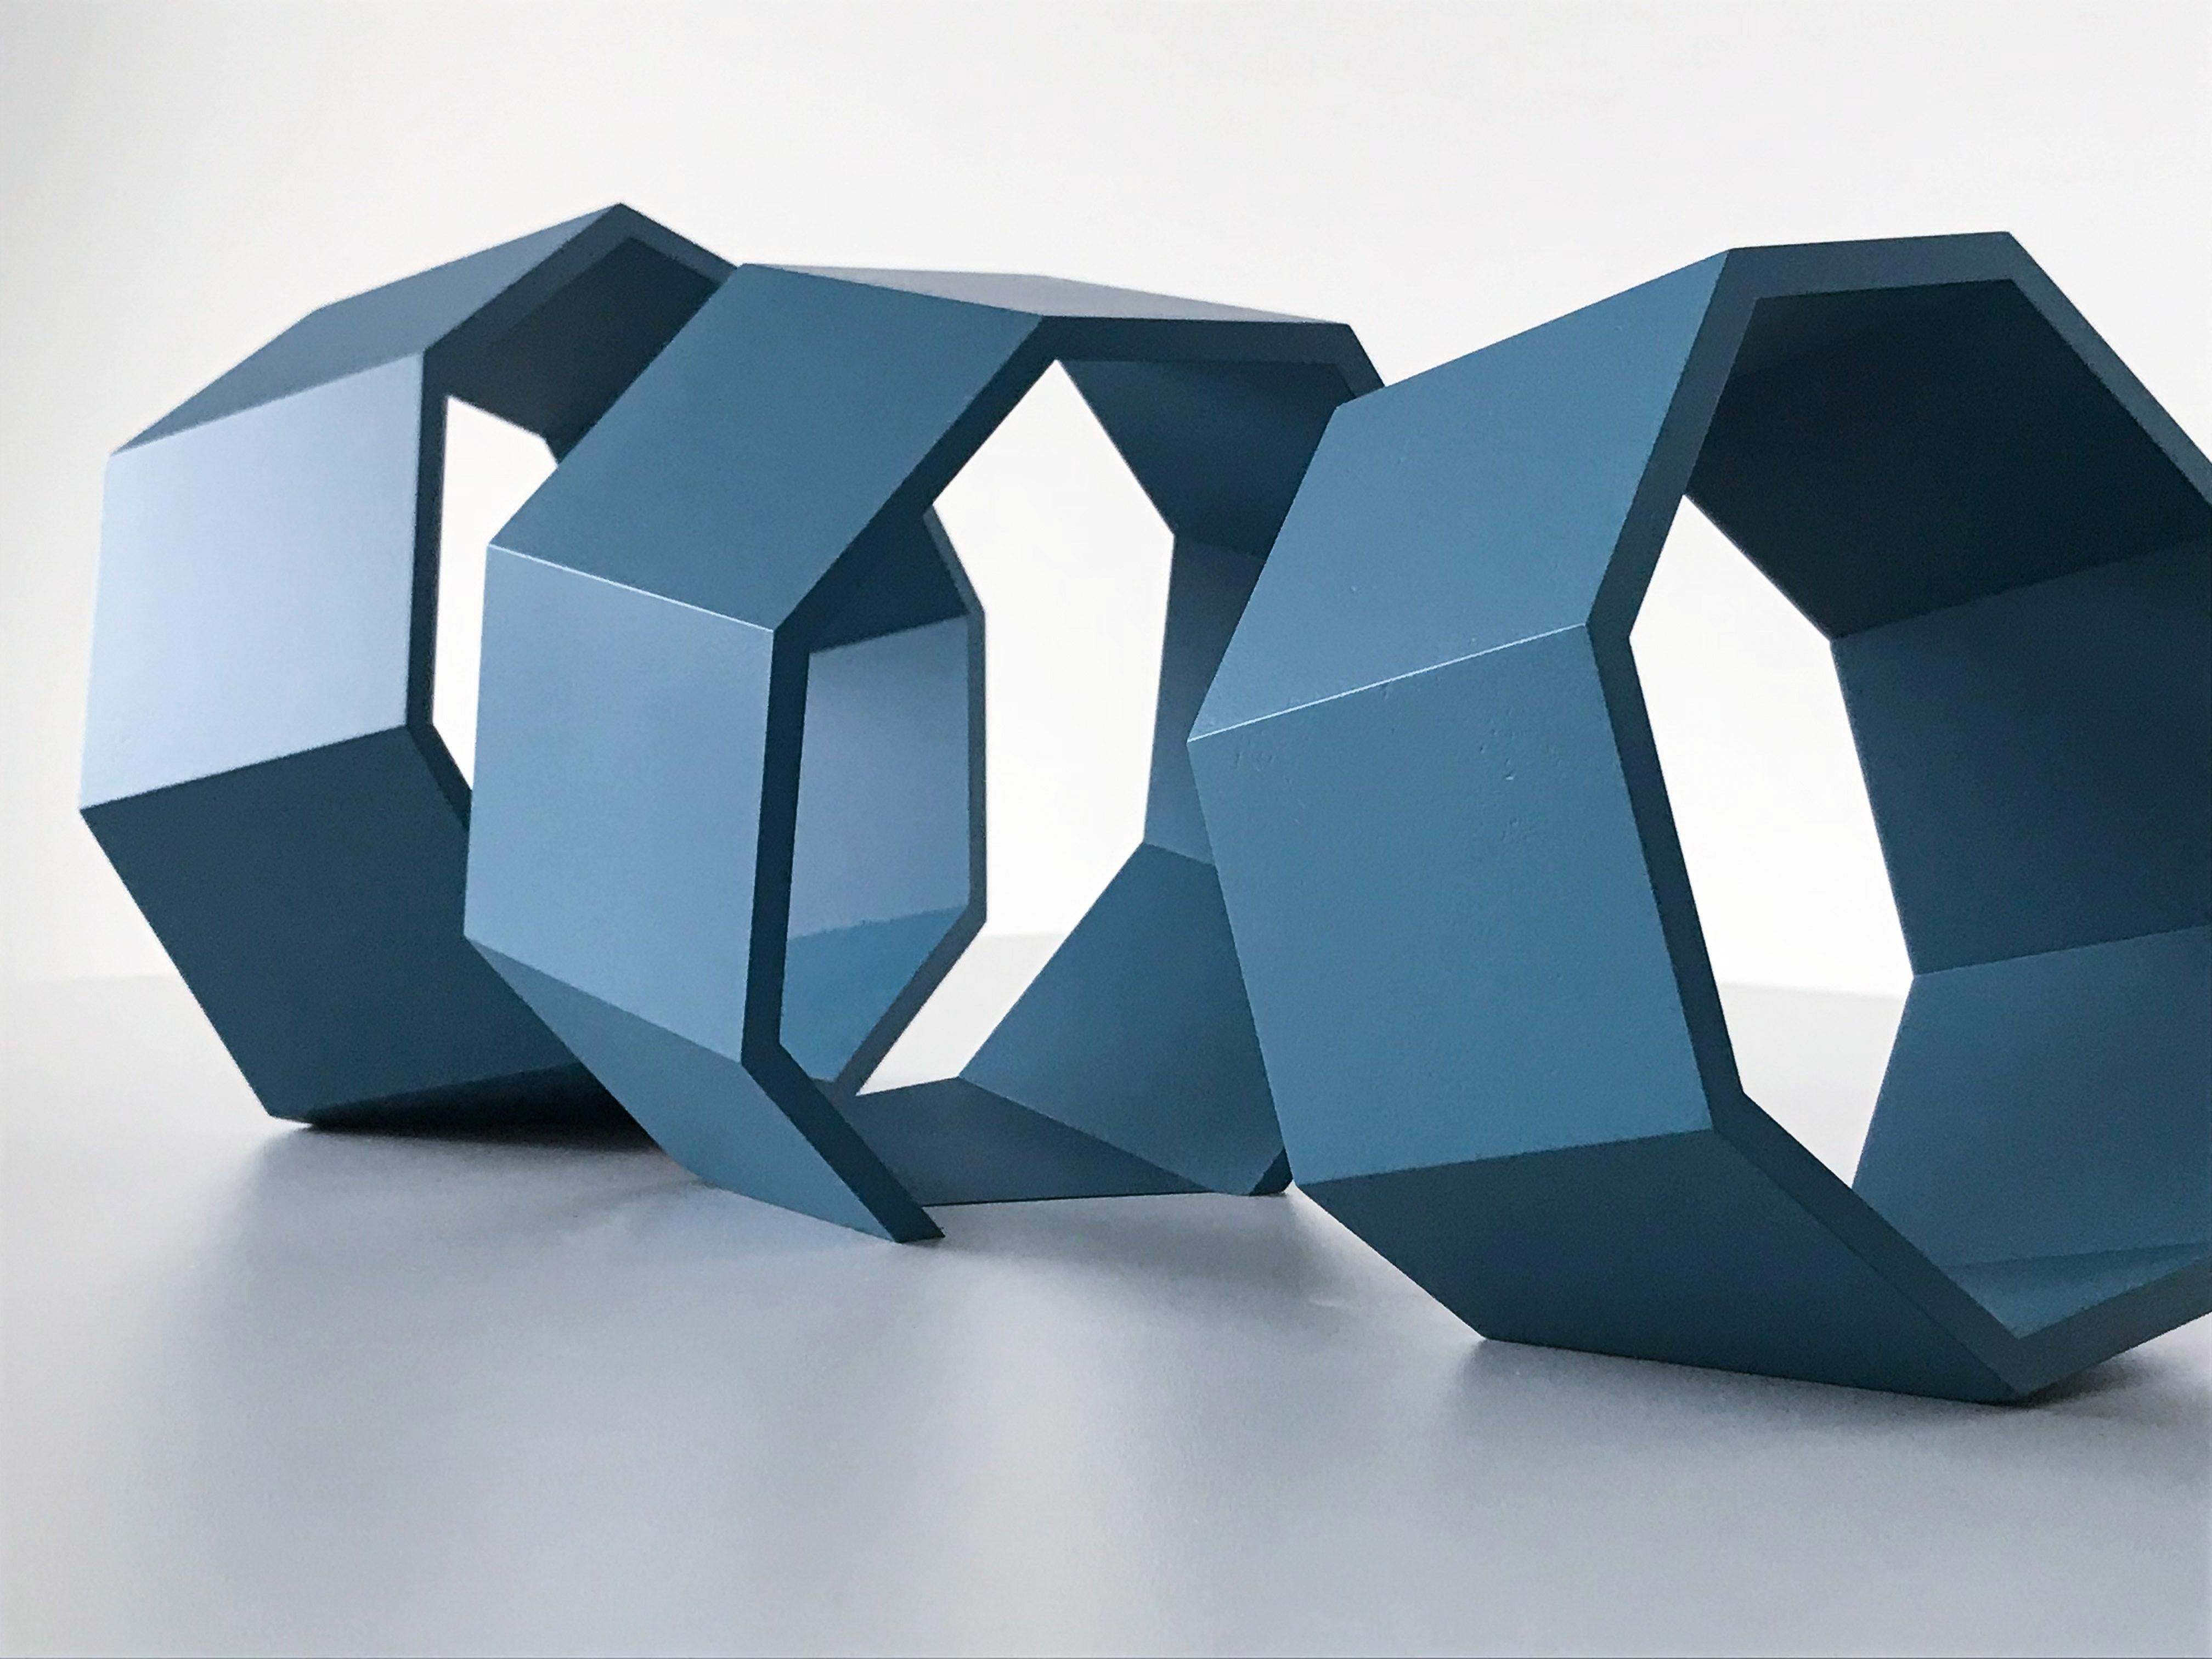 Untitled (blue octagons), Geometrical Abstract Sculpture, 2018 For Sale 2